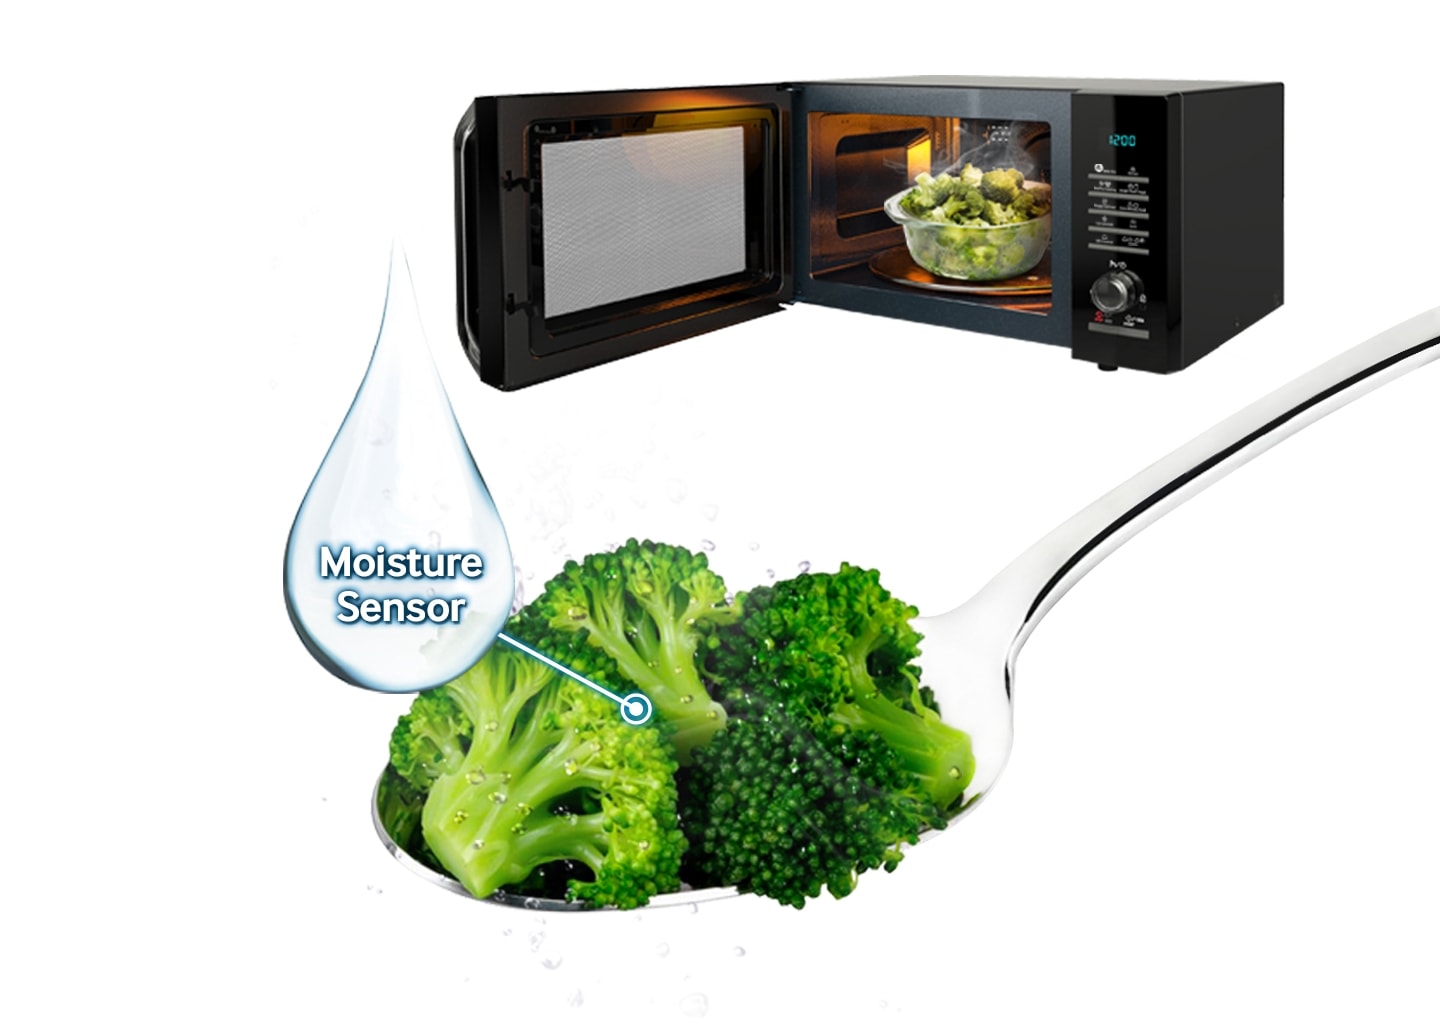 Microwave that supports healthy cooking